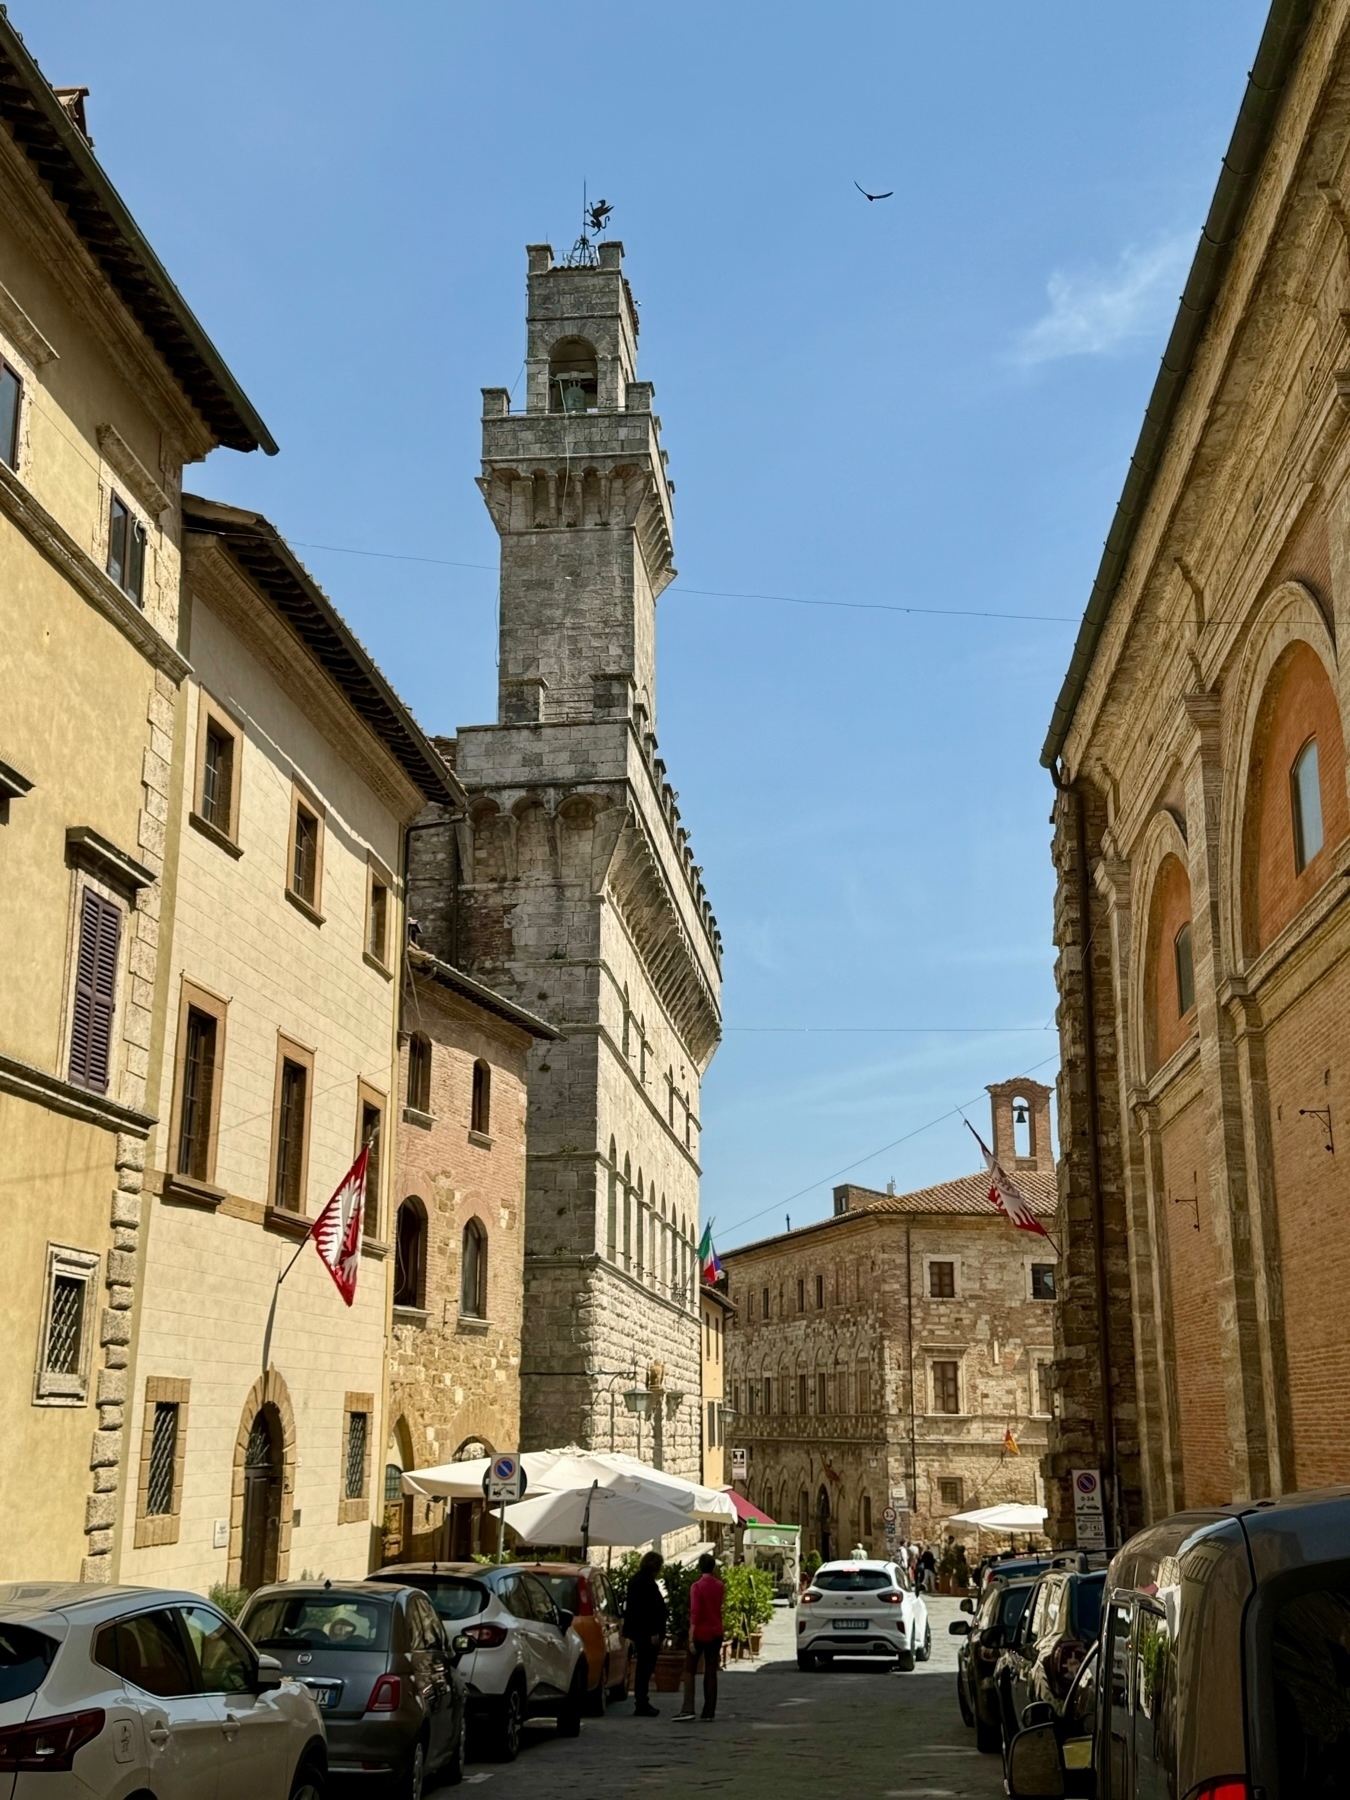 View of a narrow street in an old town, flanked by historic buildings with stone facades. In the center is a tall clock tower with a bell at the top. A few people are walking or sitting at an outdoor café with white umbrellas.